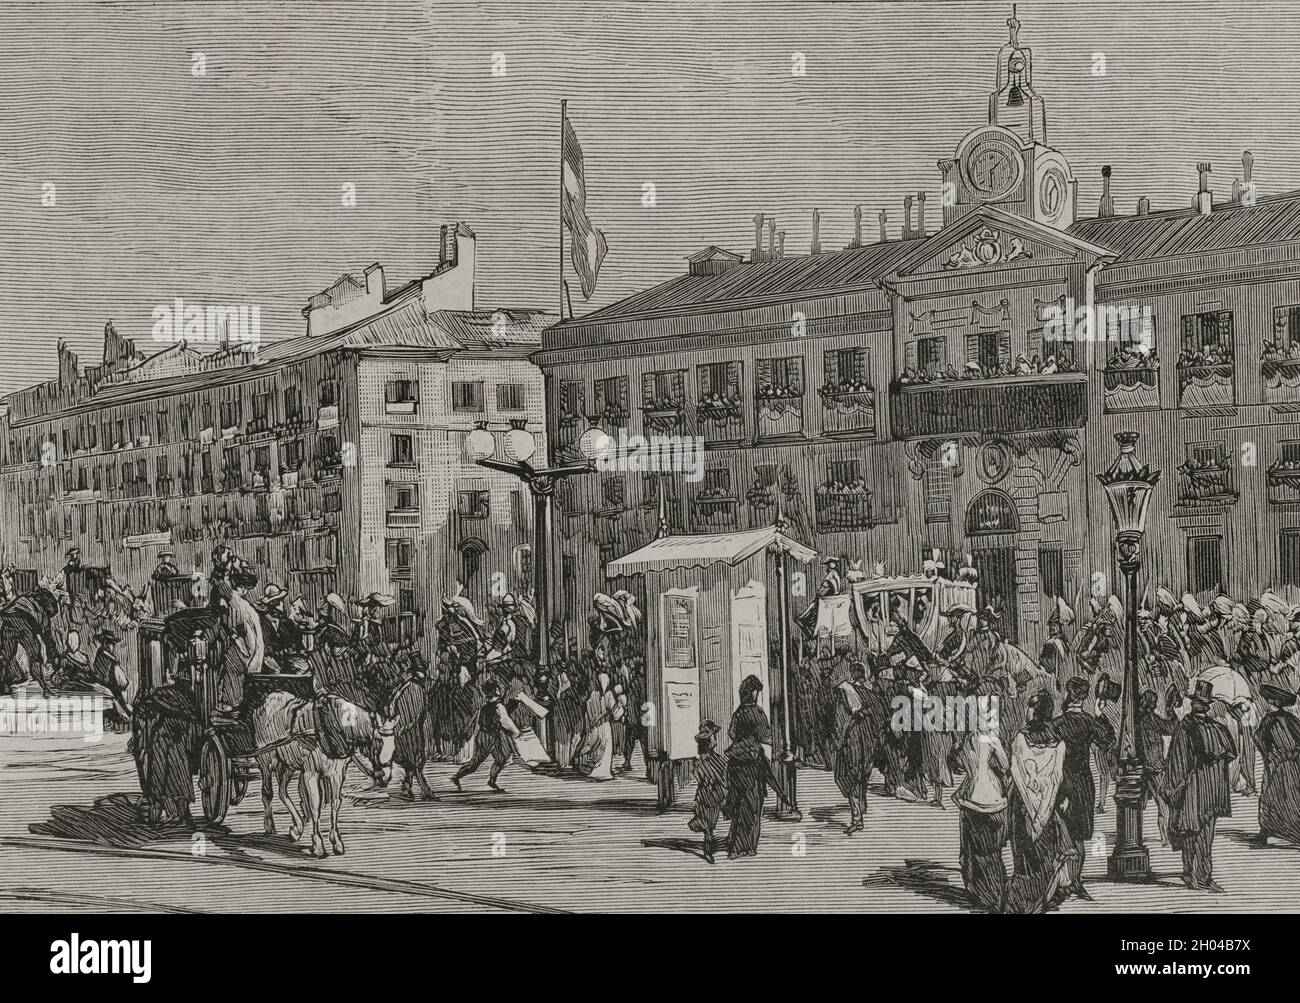 History of Spain. Madrid. Opening of the Spanish Courts on February 15, 1878. The King and Queen's itinerary to the Palace of the Courts. Passage of the royal entourage through Puerta del Sol (Gate of the Sun). Drawing from life by Ferrant. Engraving. La Ilustración Española y Americana, 1878. Stock Photo